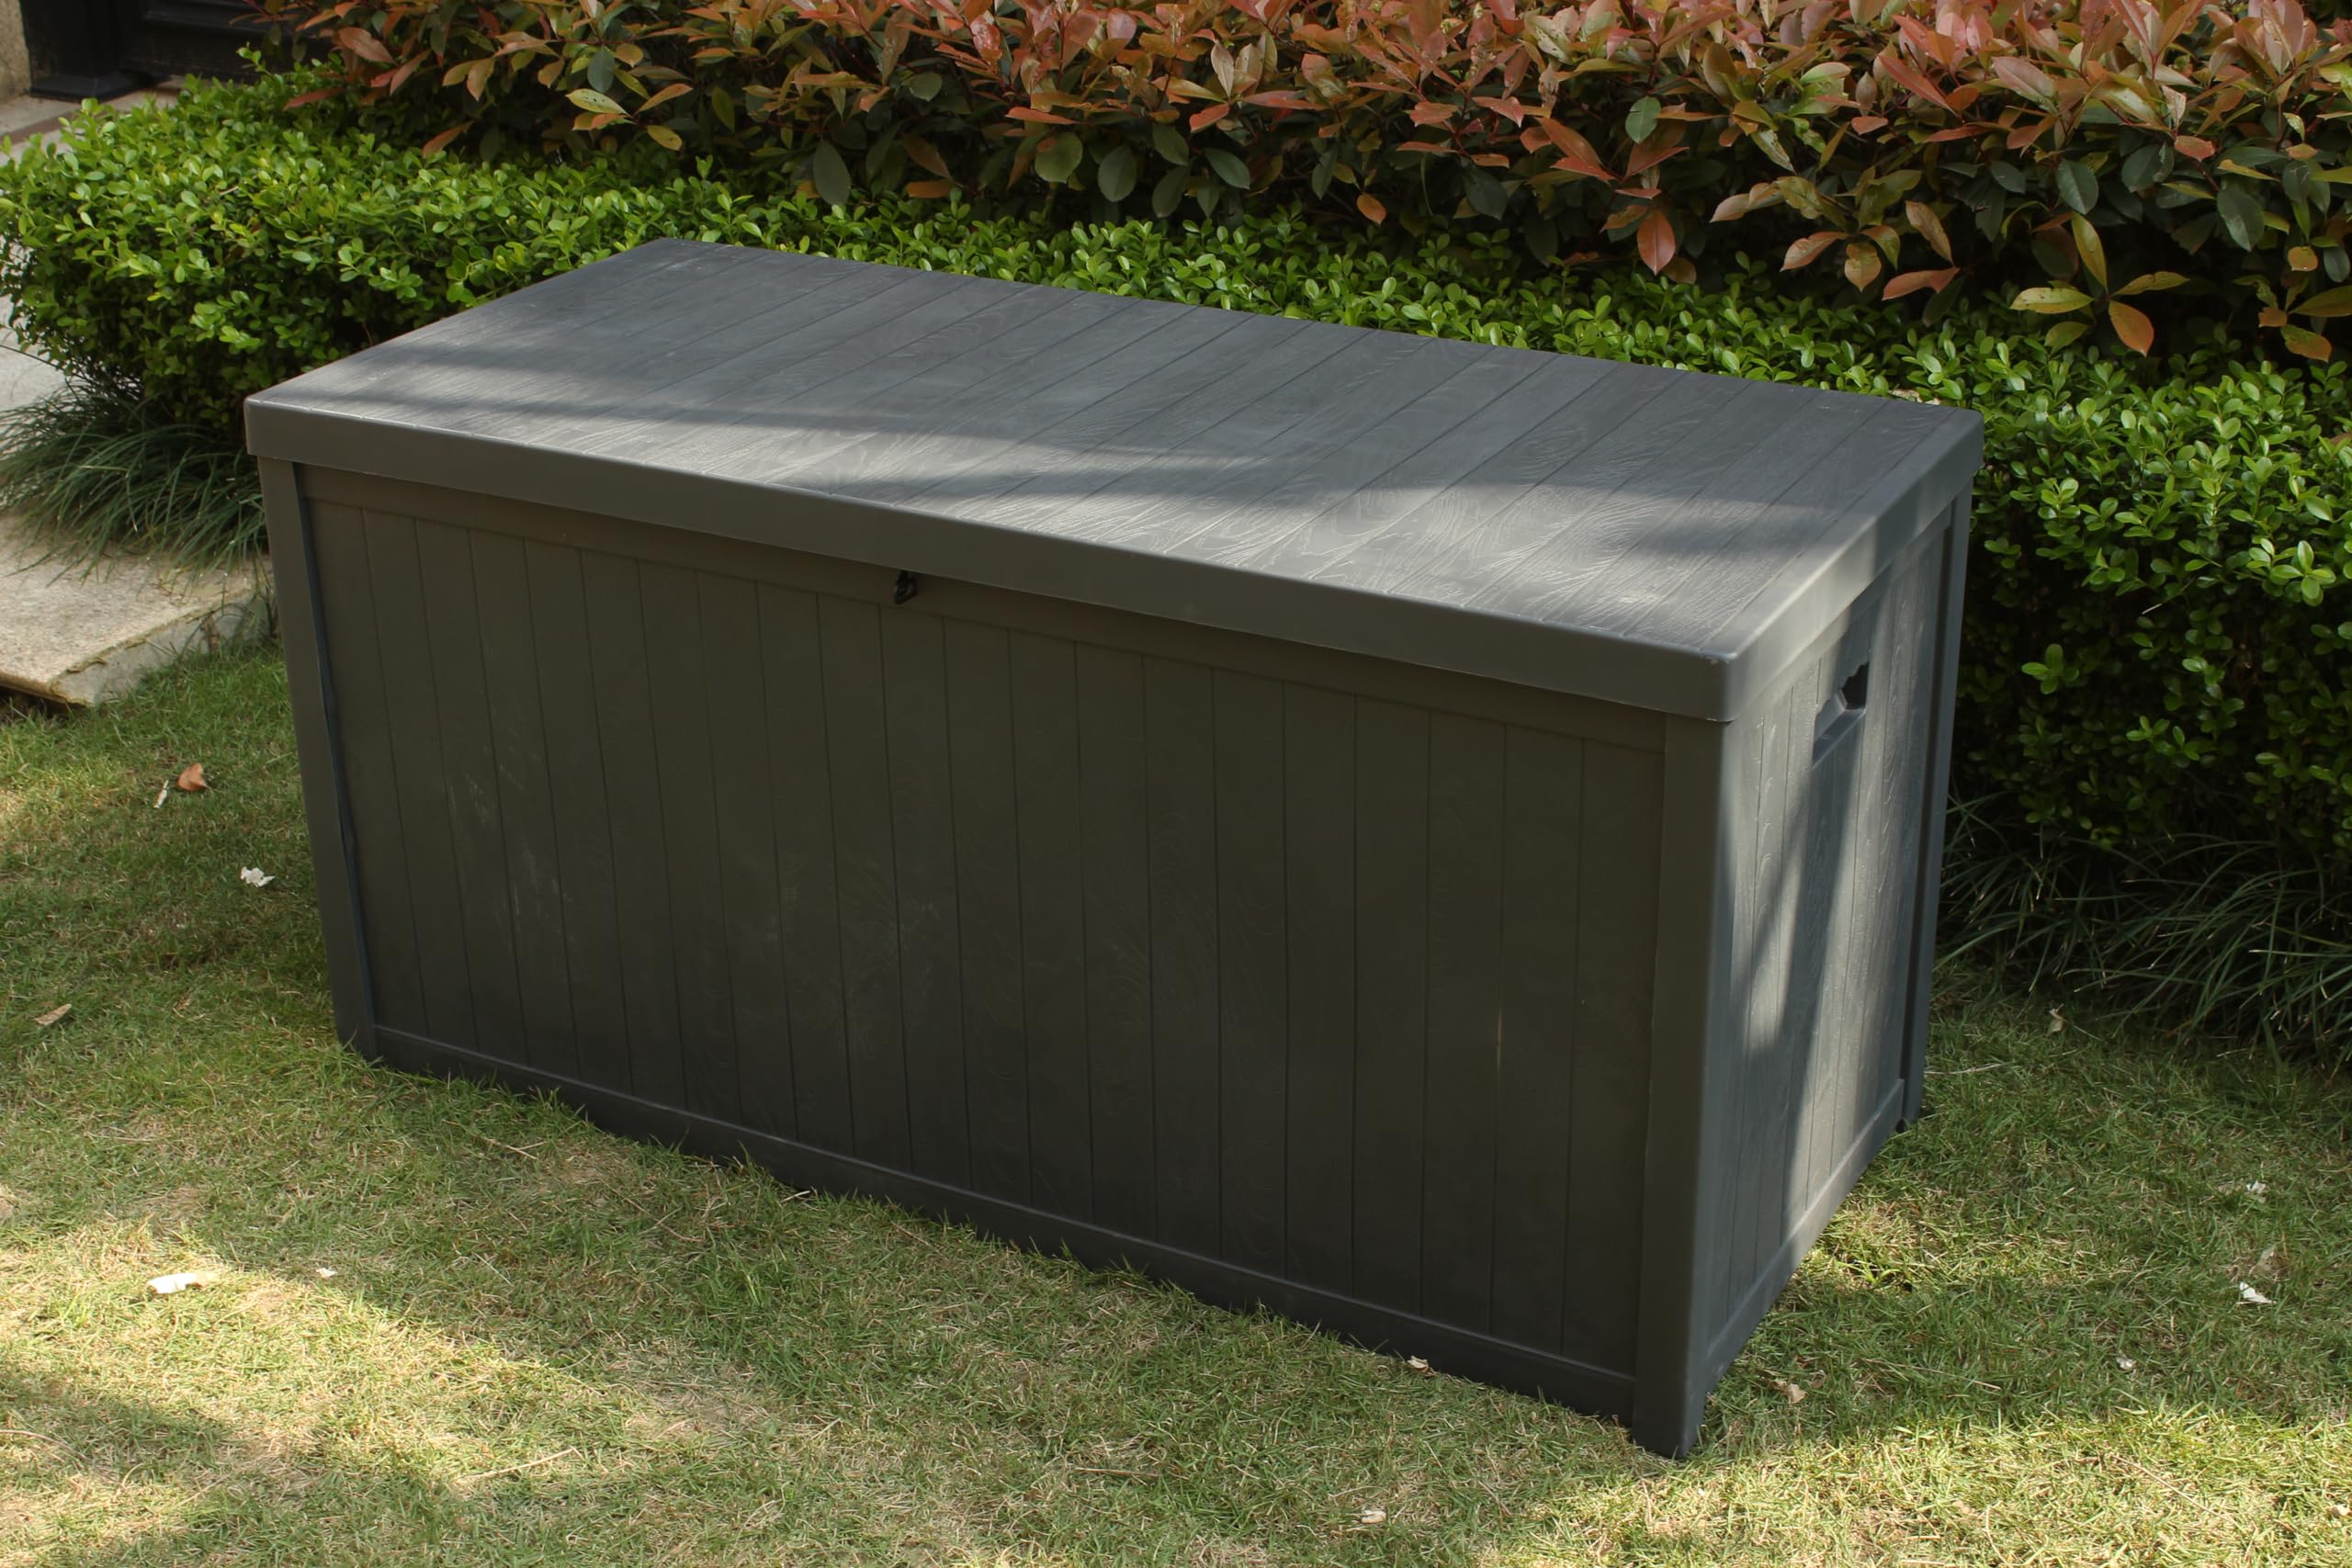 EHHLY Commercial Grade Deck Box, 113 Gallon Outdoor Storage Box Large, Grey